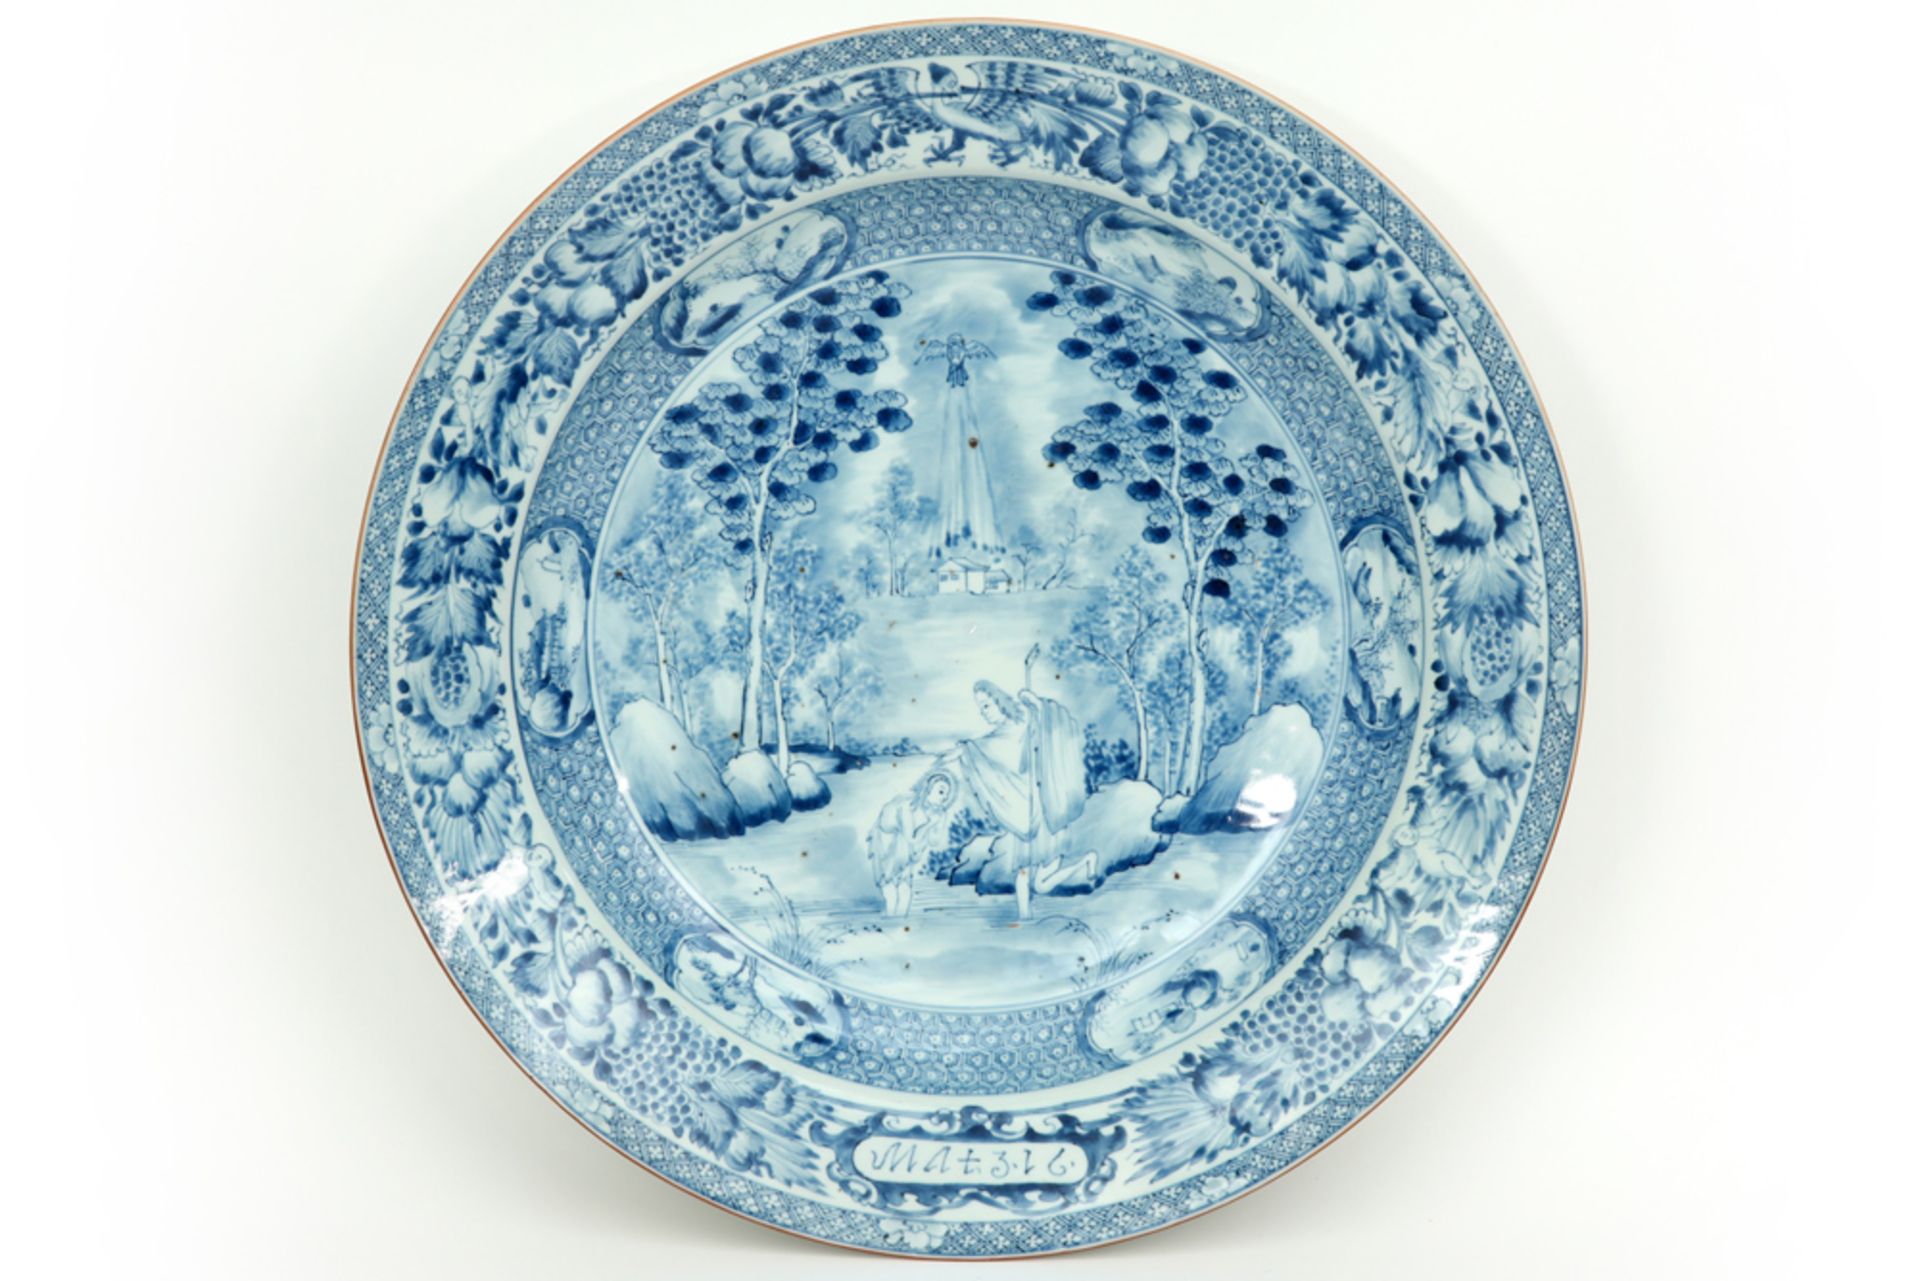 large early 18th Cent. Chinese "Jesuit" dish in porcelain with a blue-white decor with the